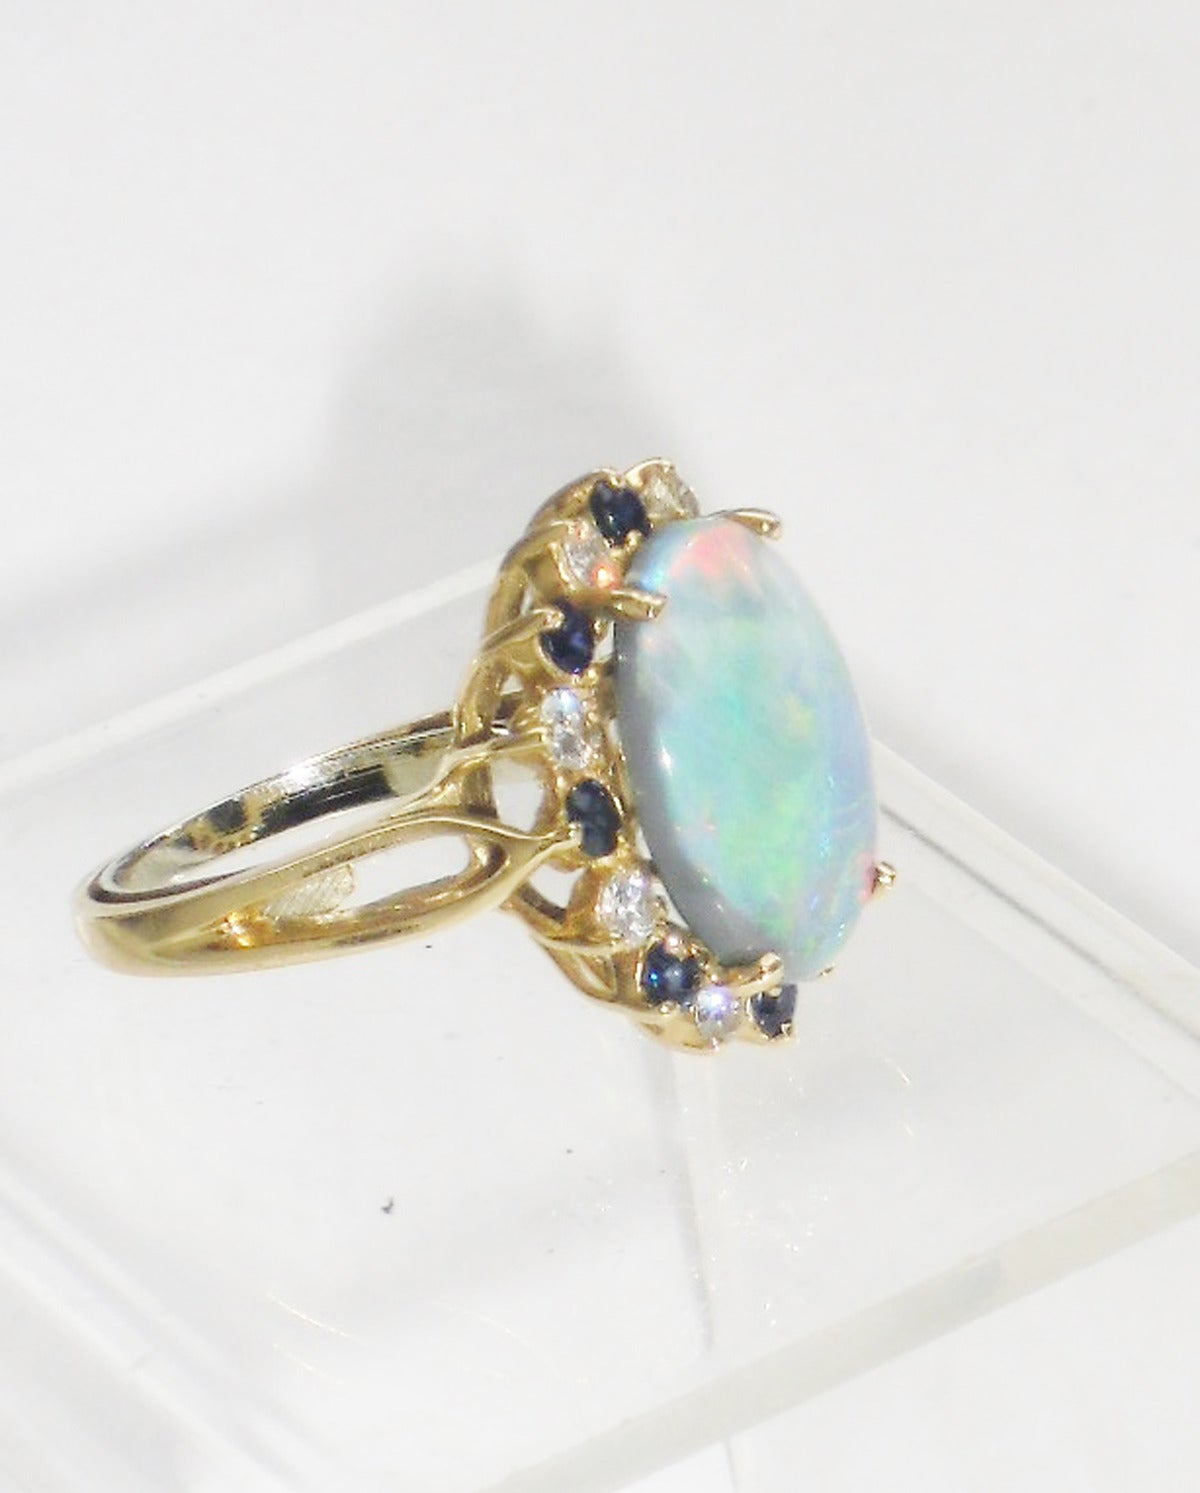 Vintage Beautiful oval Jelly Fire opal ring set with diamonds and Sapphires. Oval shape in yellow gold.  Circa 1950
Sz 7